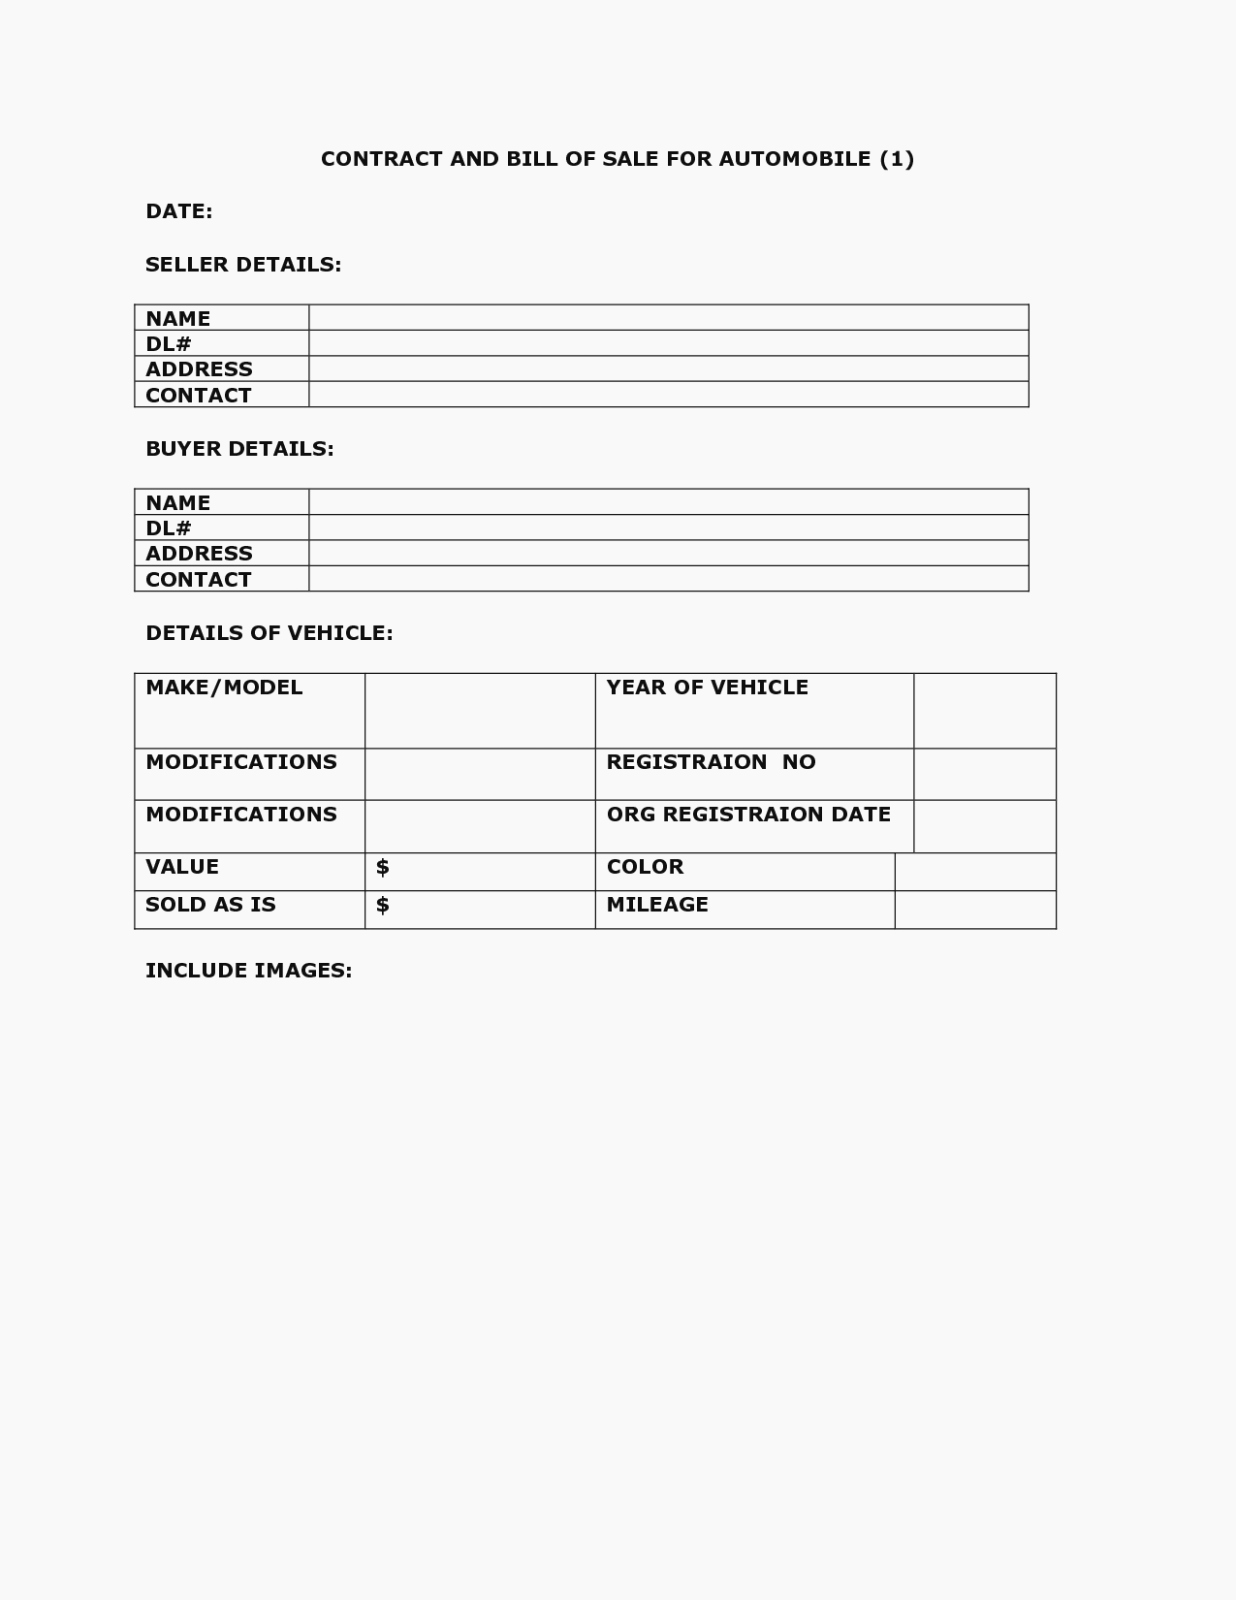 Used Car Contract Template Awesome is Selling Car as is form